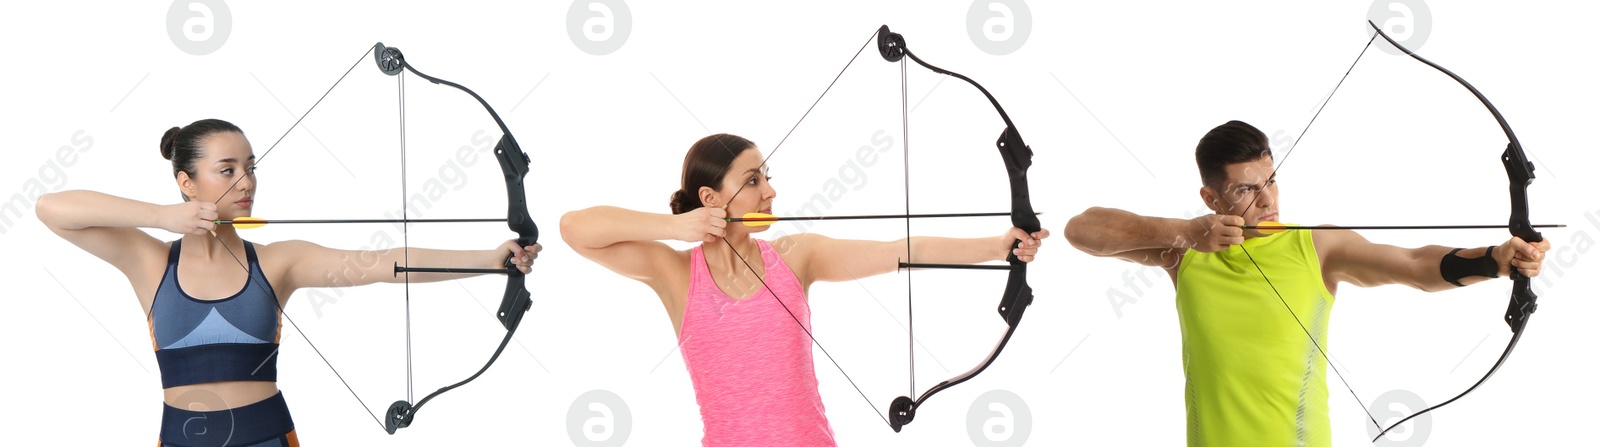 Image of People practicing archery on white background, collage. Banner design